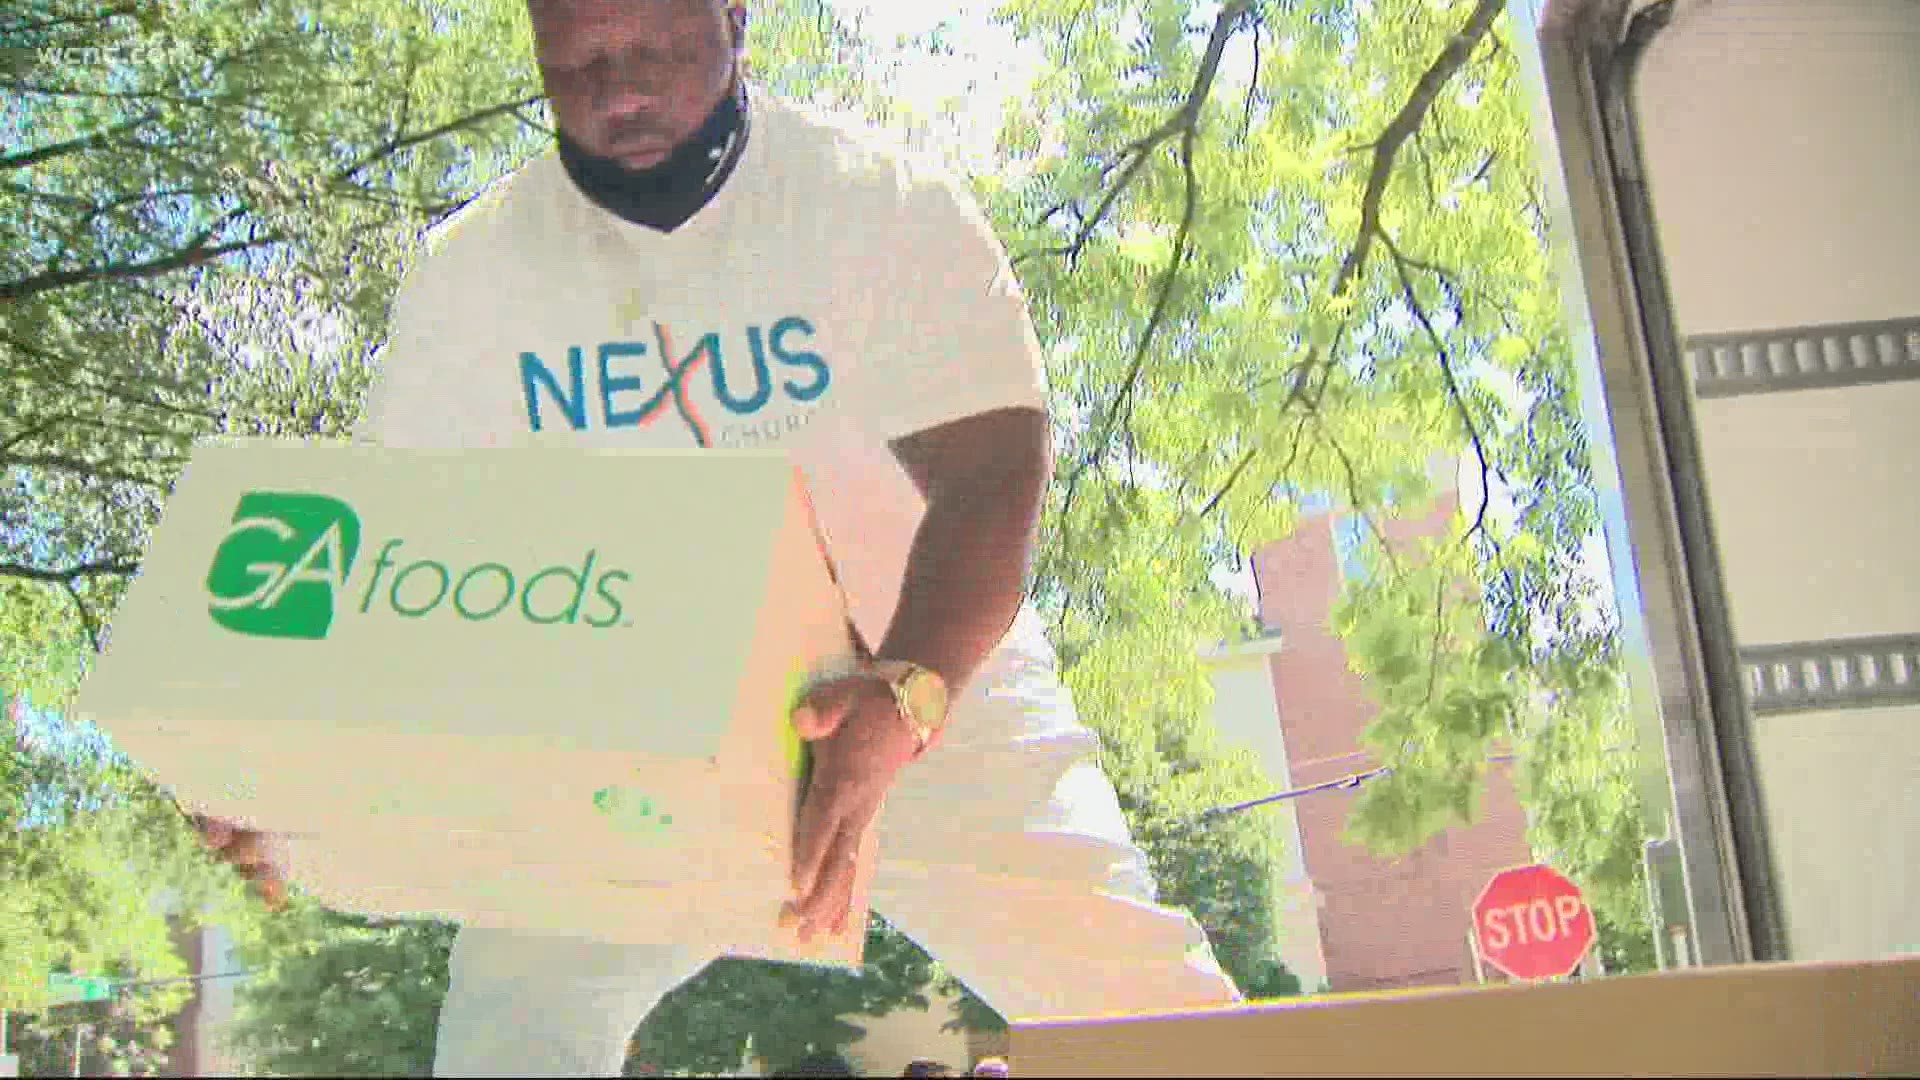 This is the third week NEXUS Church in Charlotte has offered free groceries.